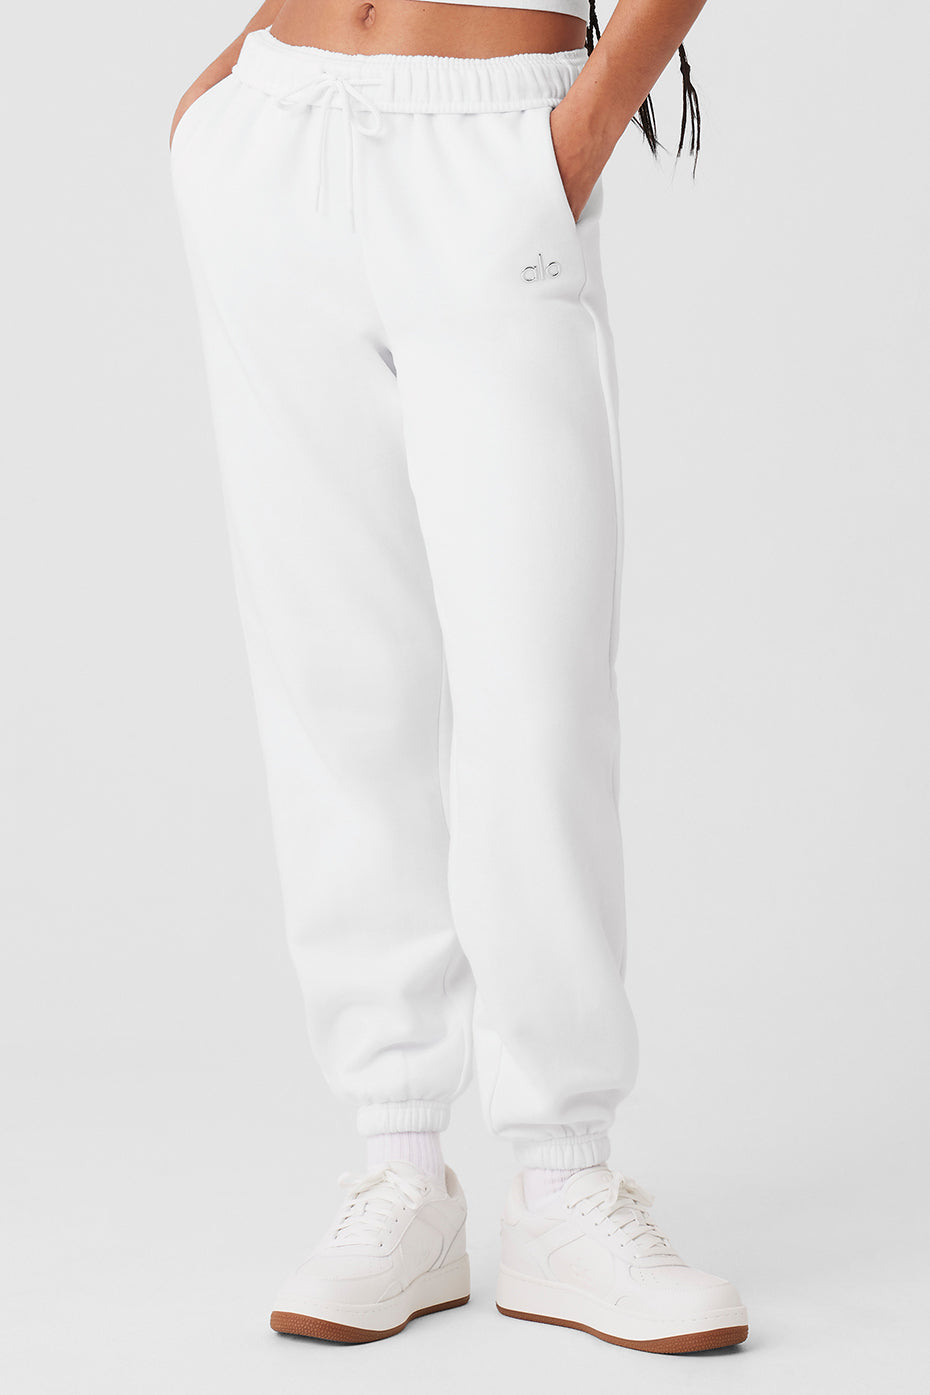 Alo Yoga Track pants and jogging bottoms for Women